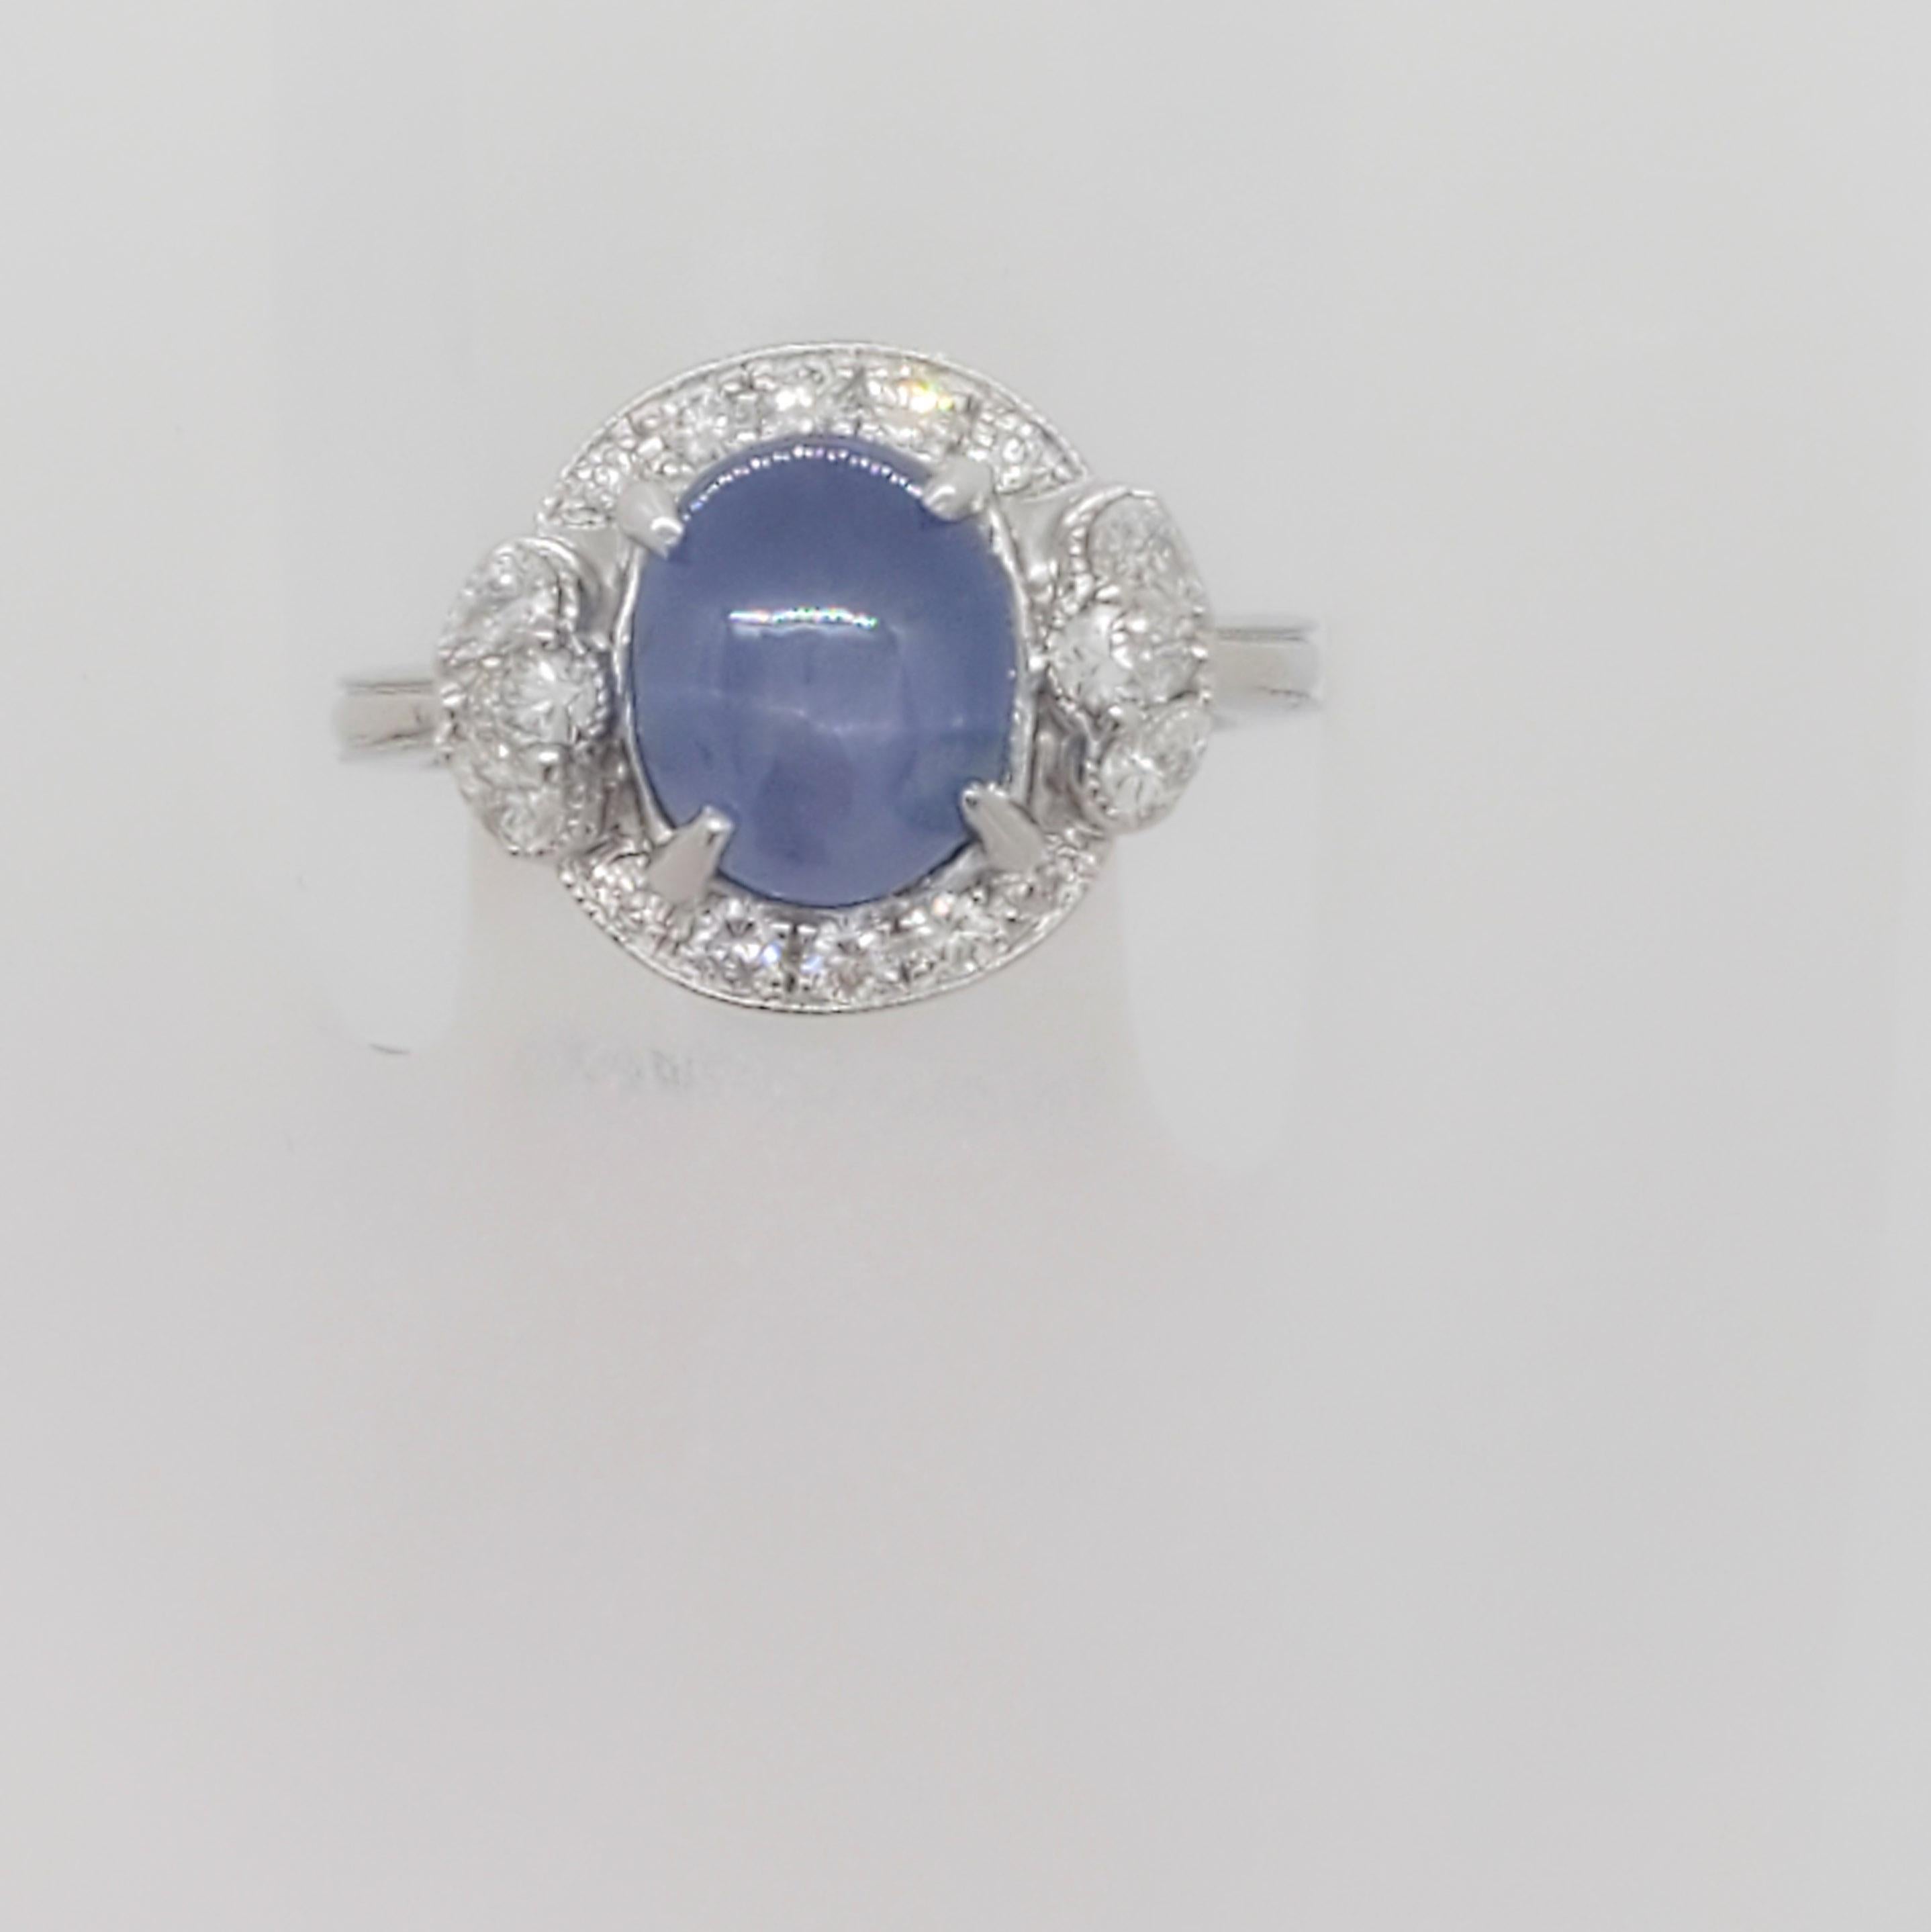 Oval Cut Estate Blue Star Sapphire and White Diamond Cocktail Ring in 18k White Gold